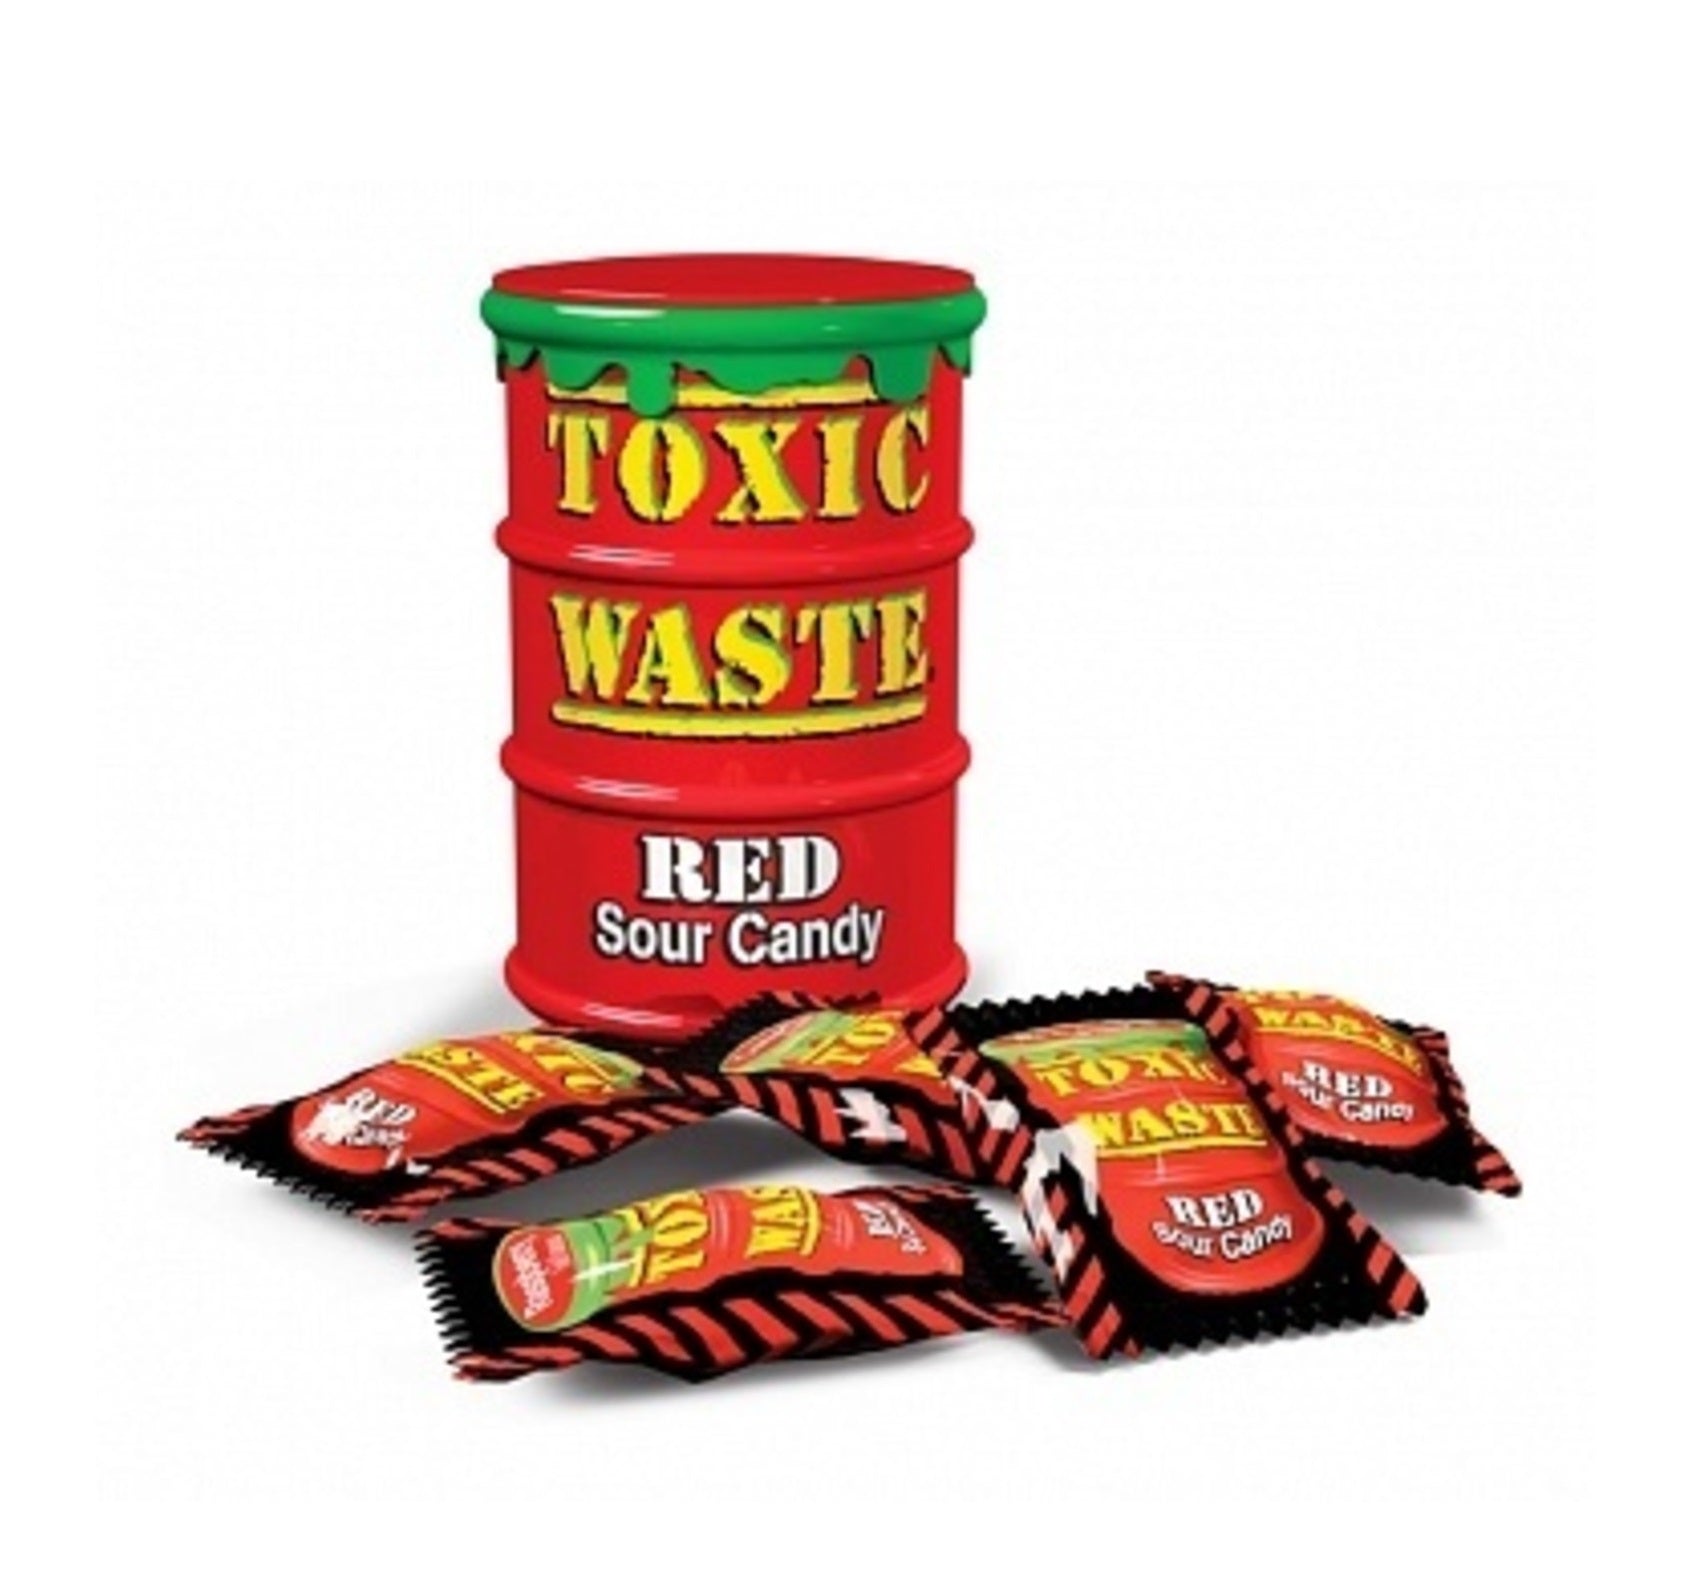 TOXIC WASTE RED SOUR CANDY DRUM 42 GR.